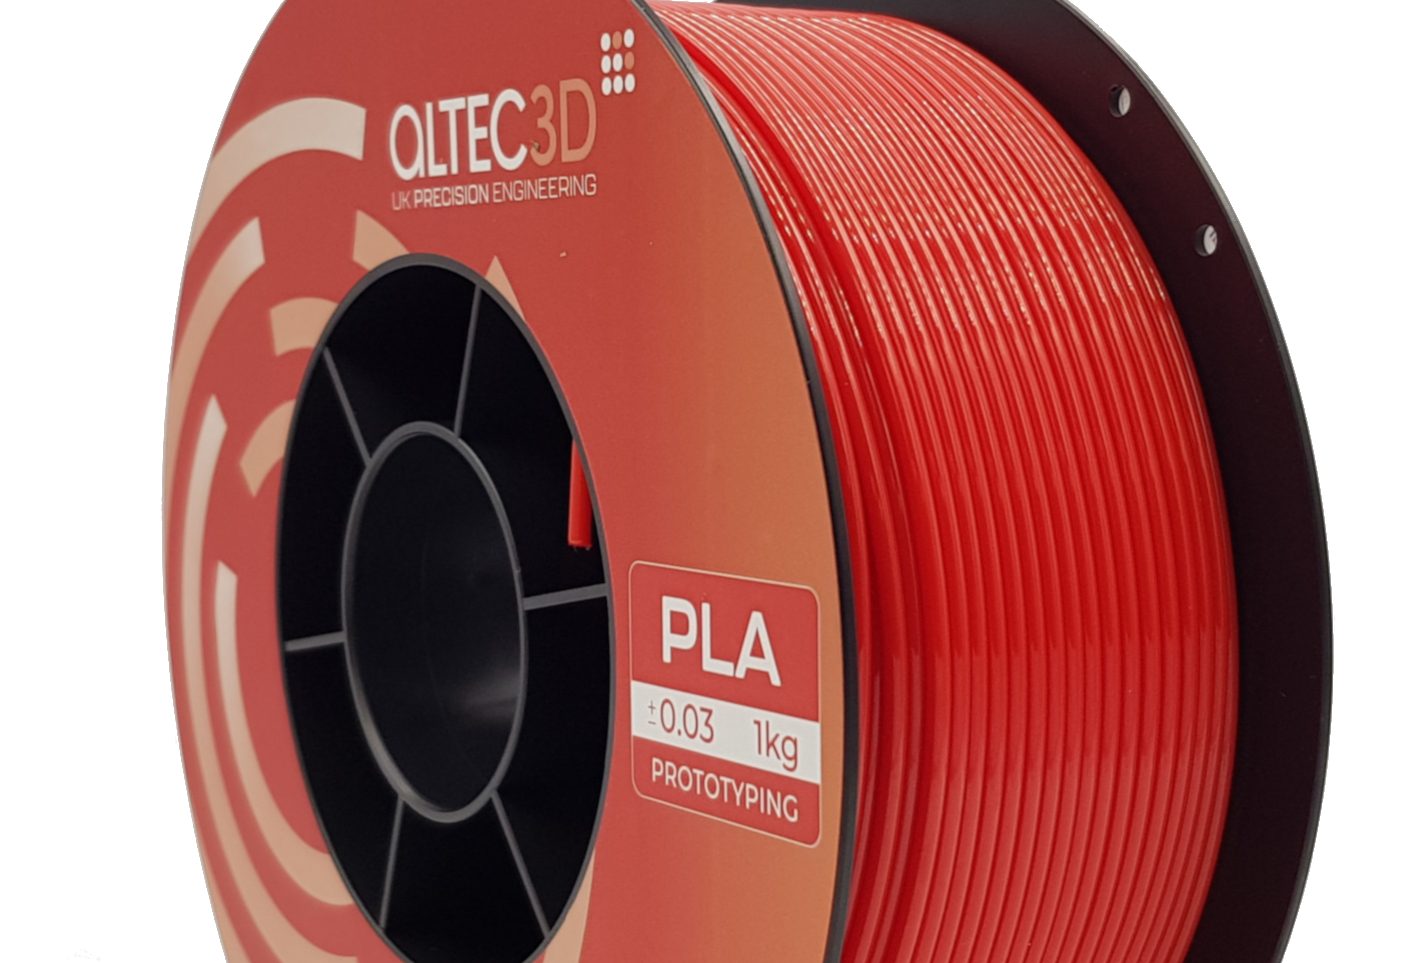 More info on Red Balloon Filament